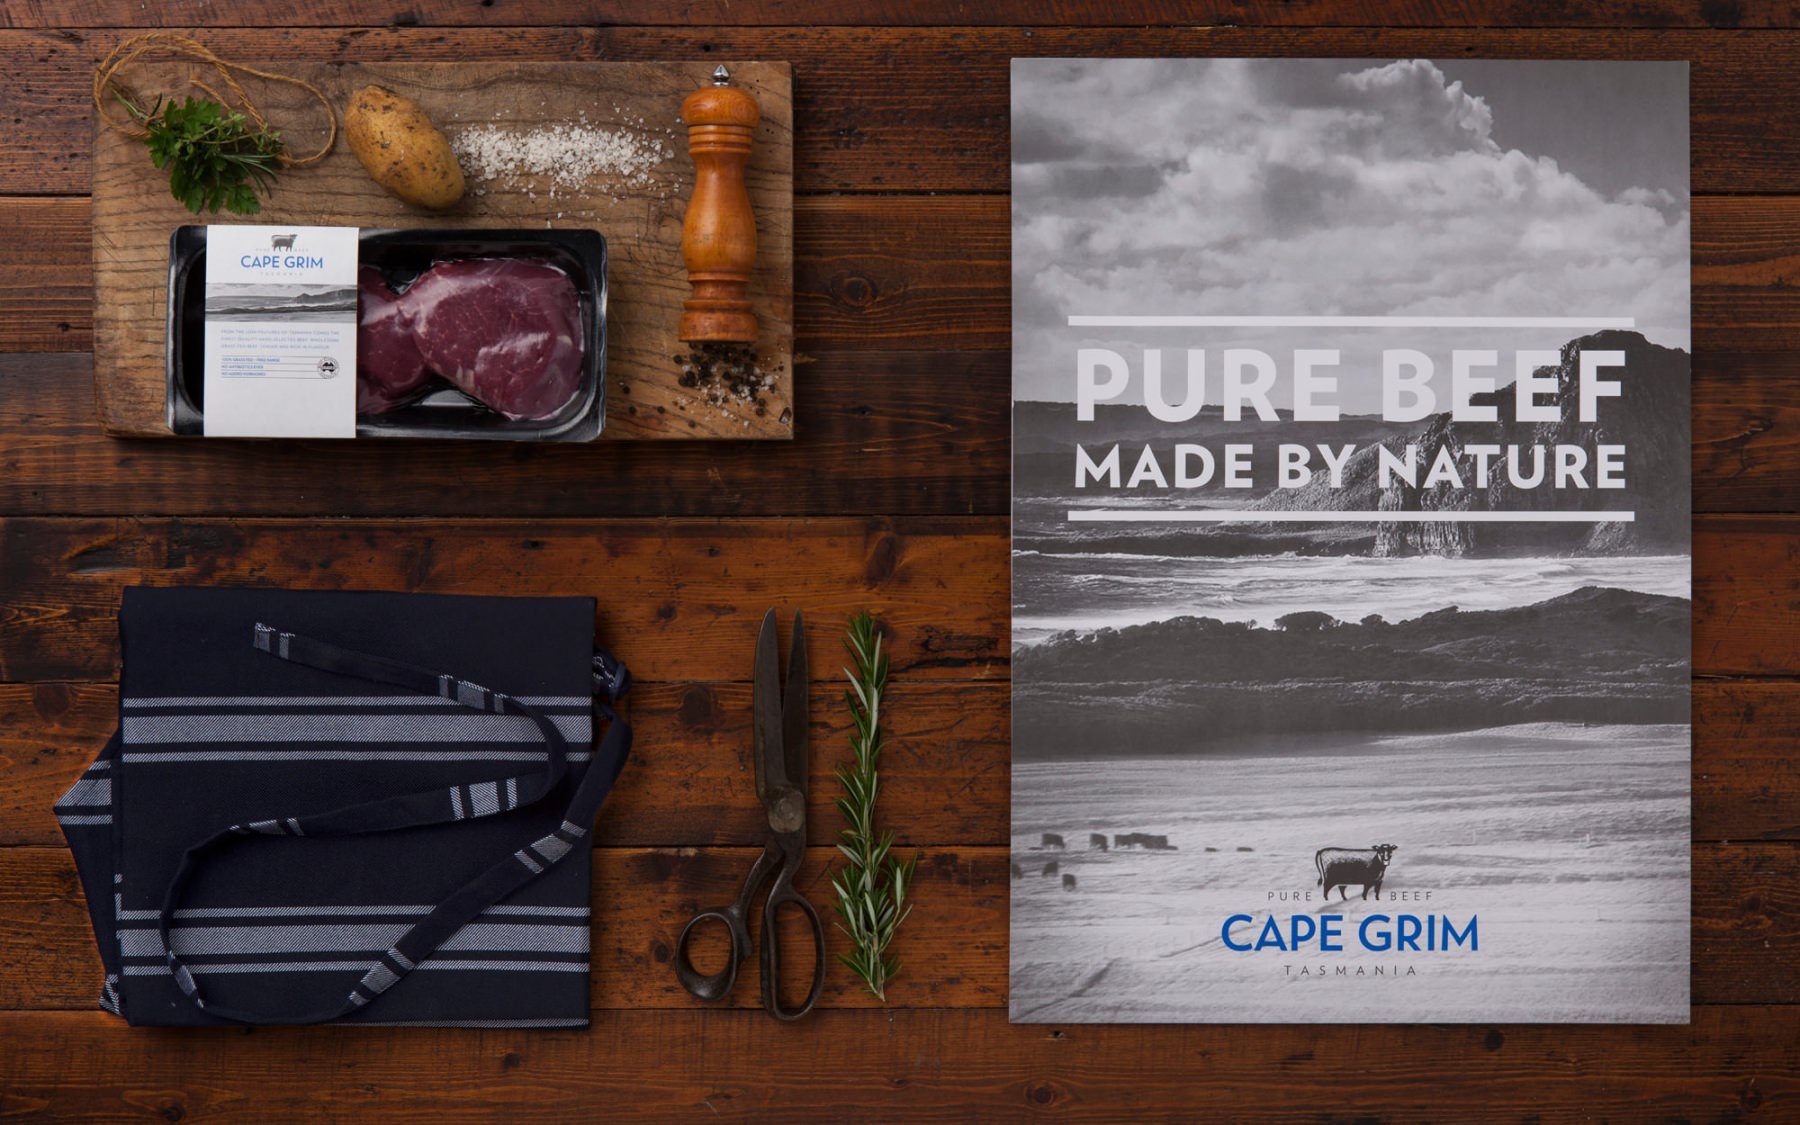 On a wooden table, the packaging for Cape Grim beef is presented, reflecting its premium quality and elegant design.